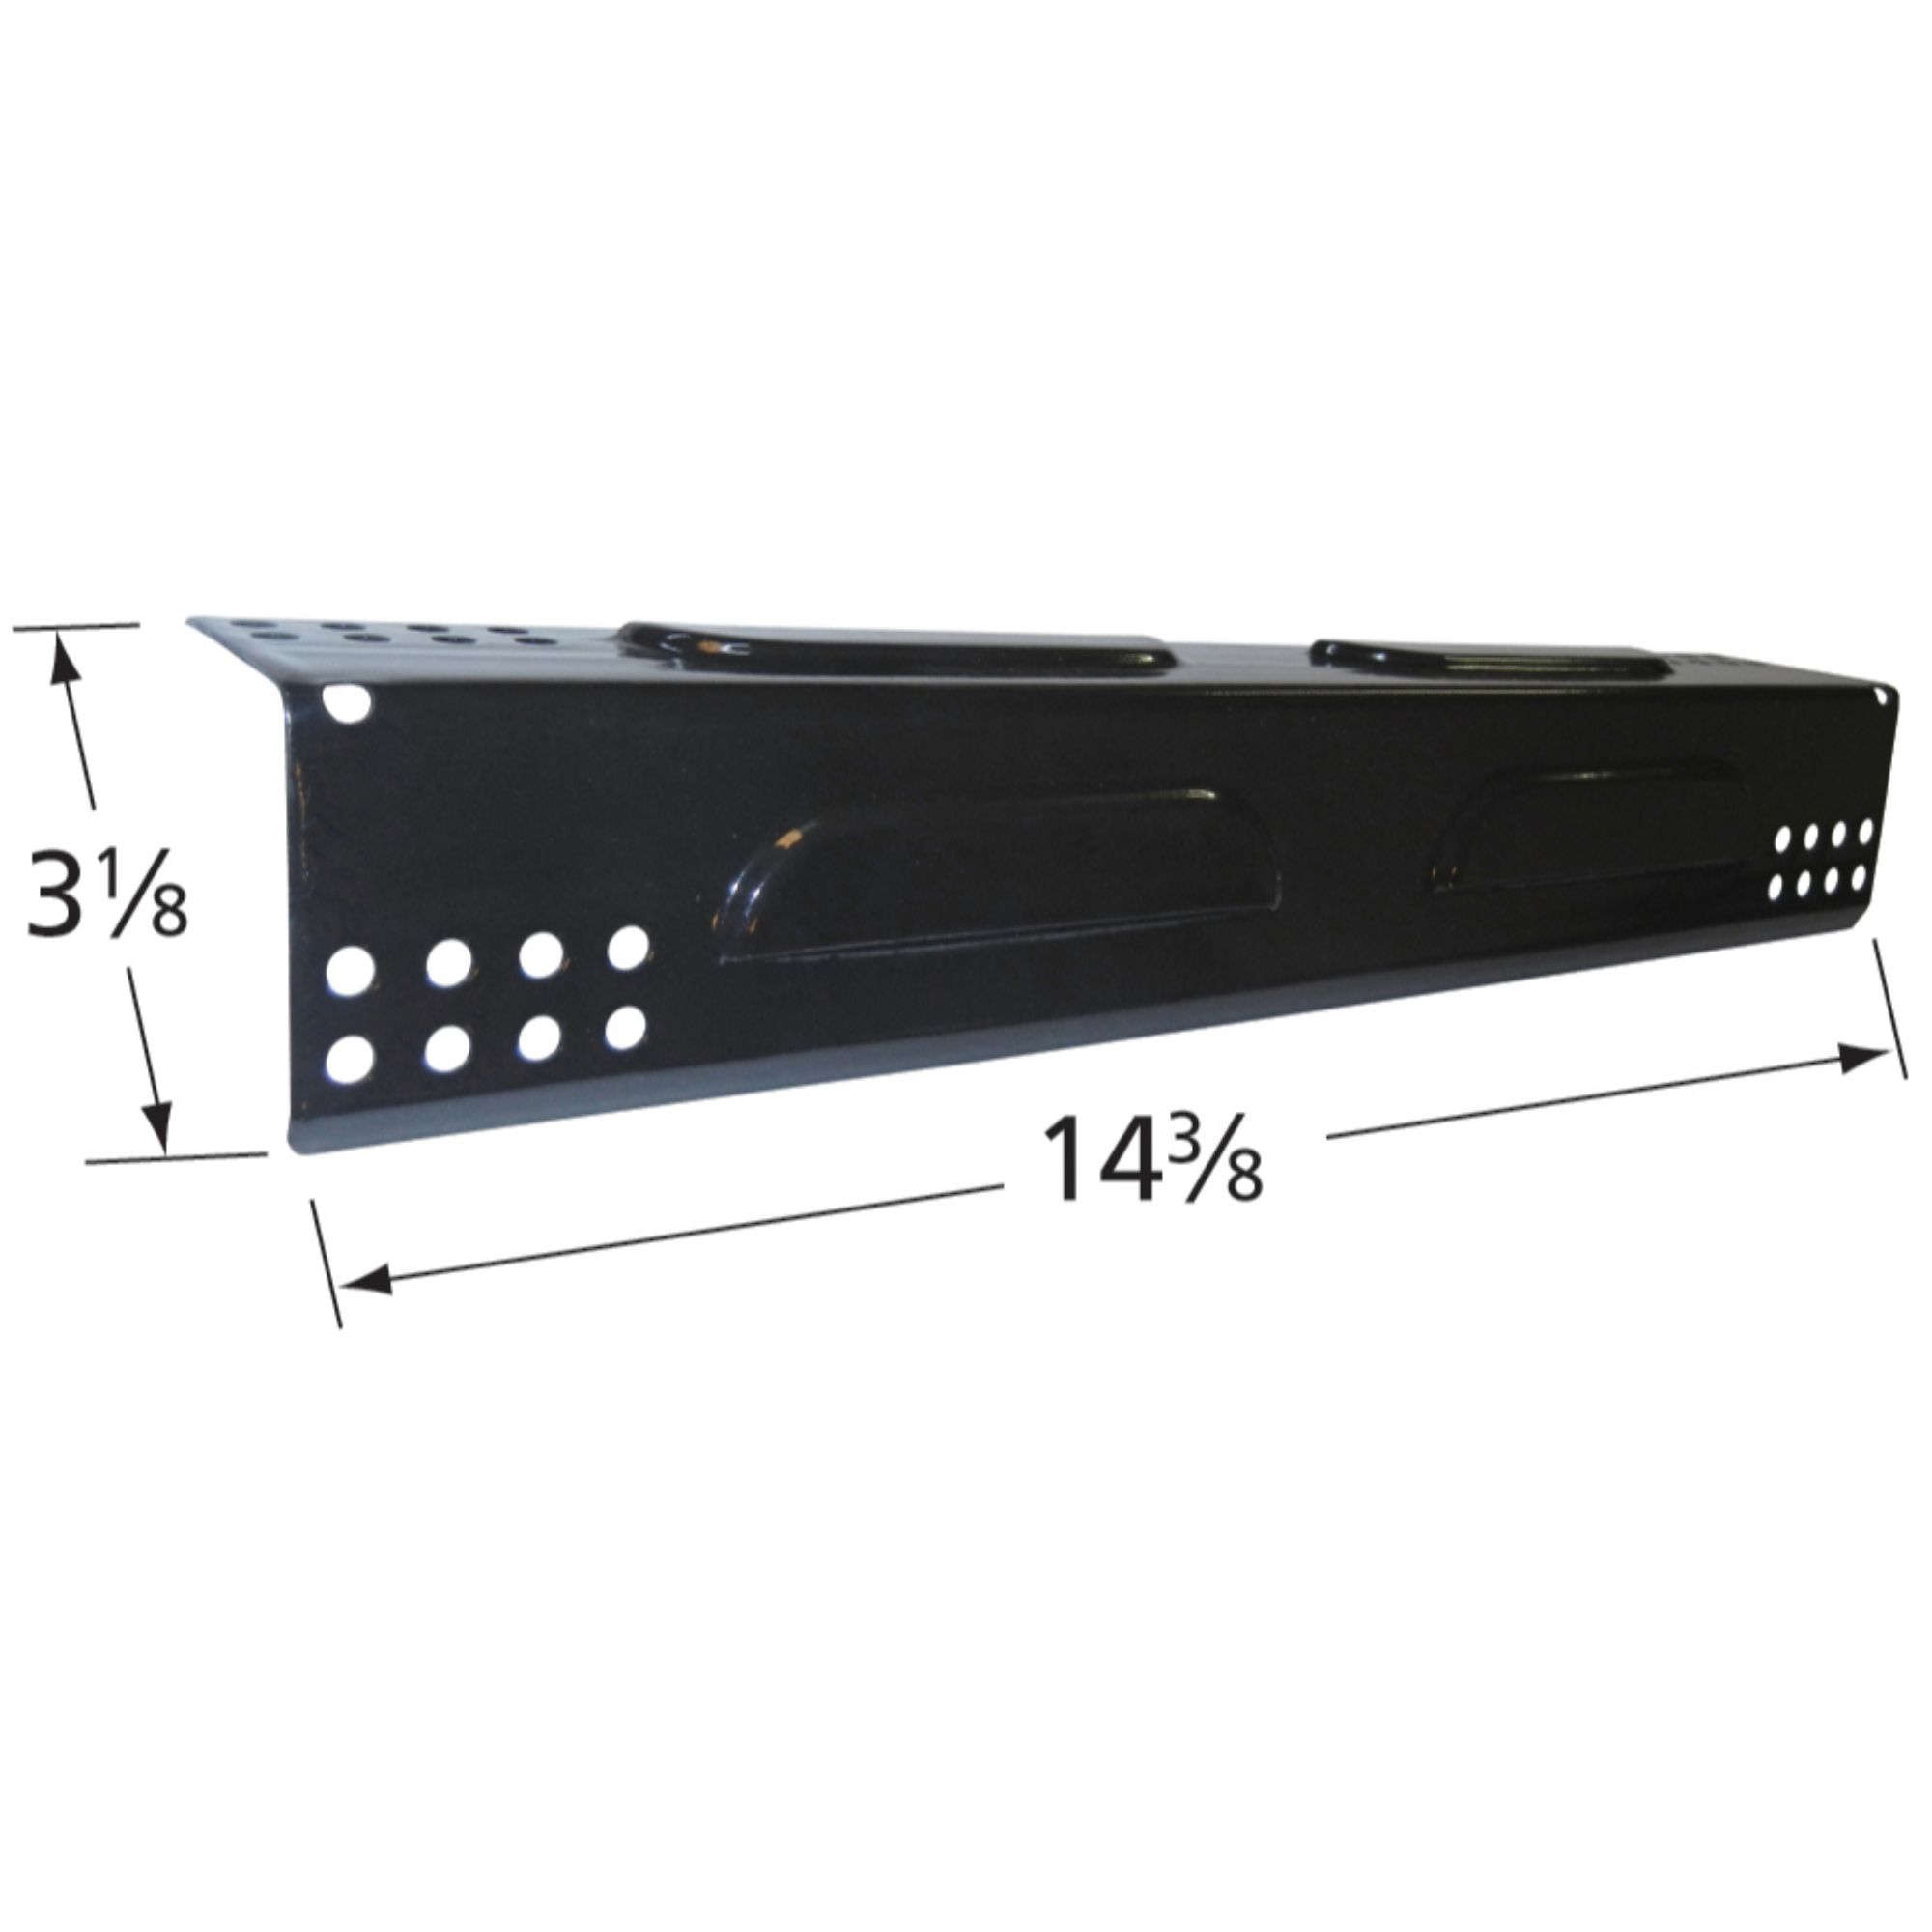 Porcelain Steel Heat Plate Replacement for Gas Grill Backyard Grill BY14-101-00 - image 2 of 2